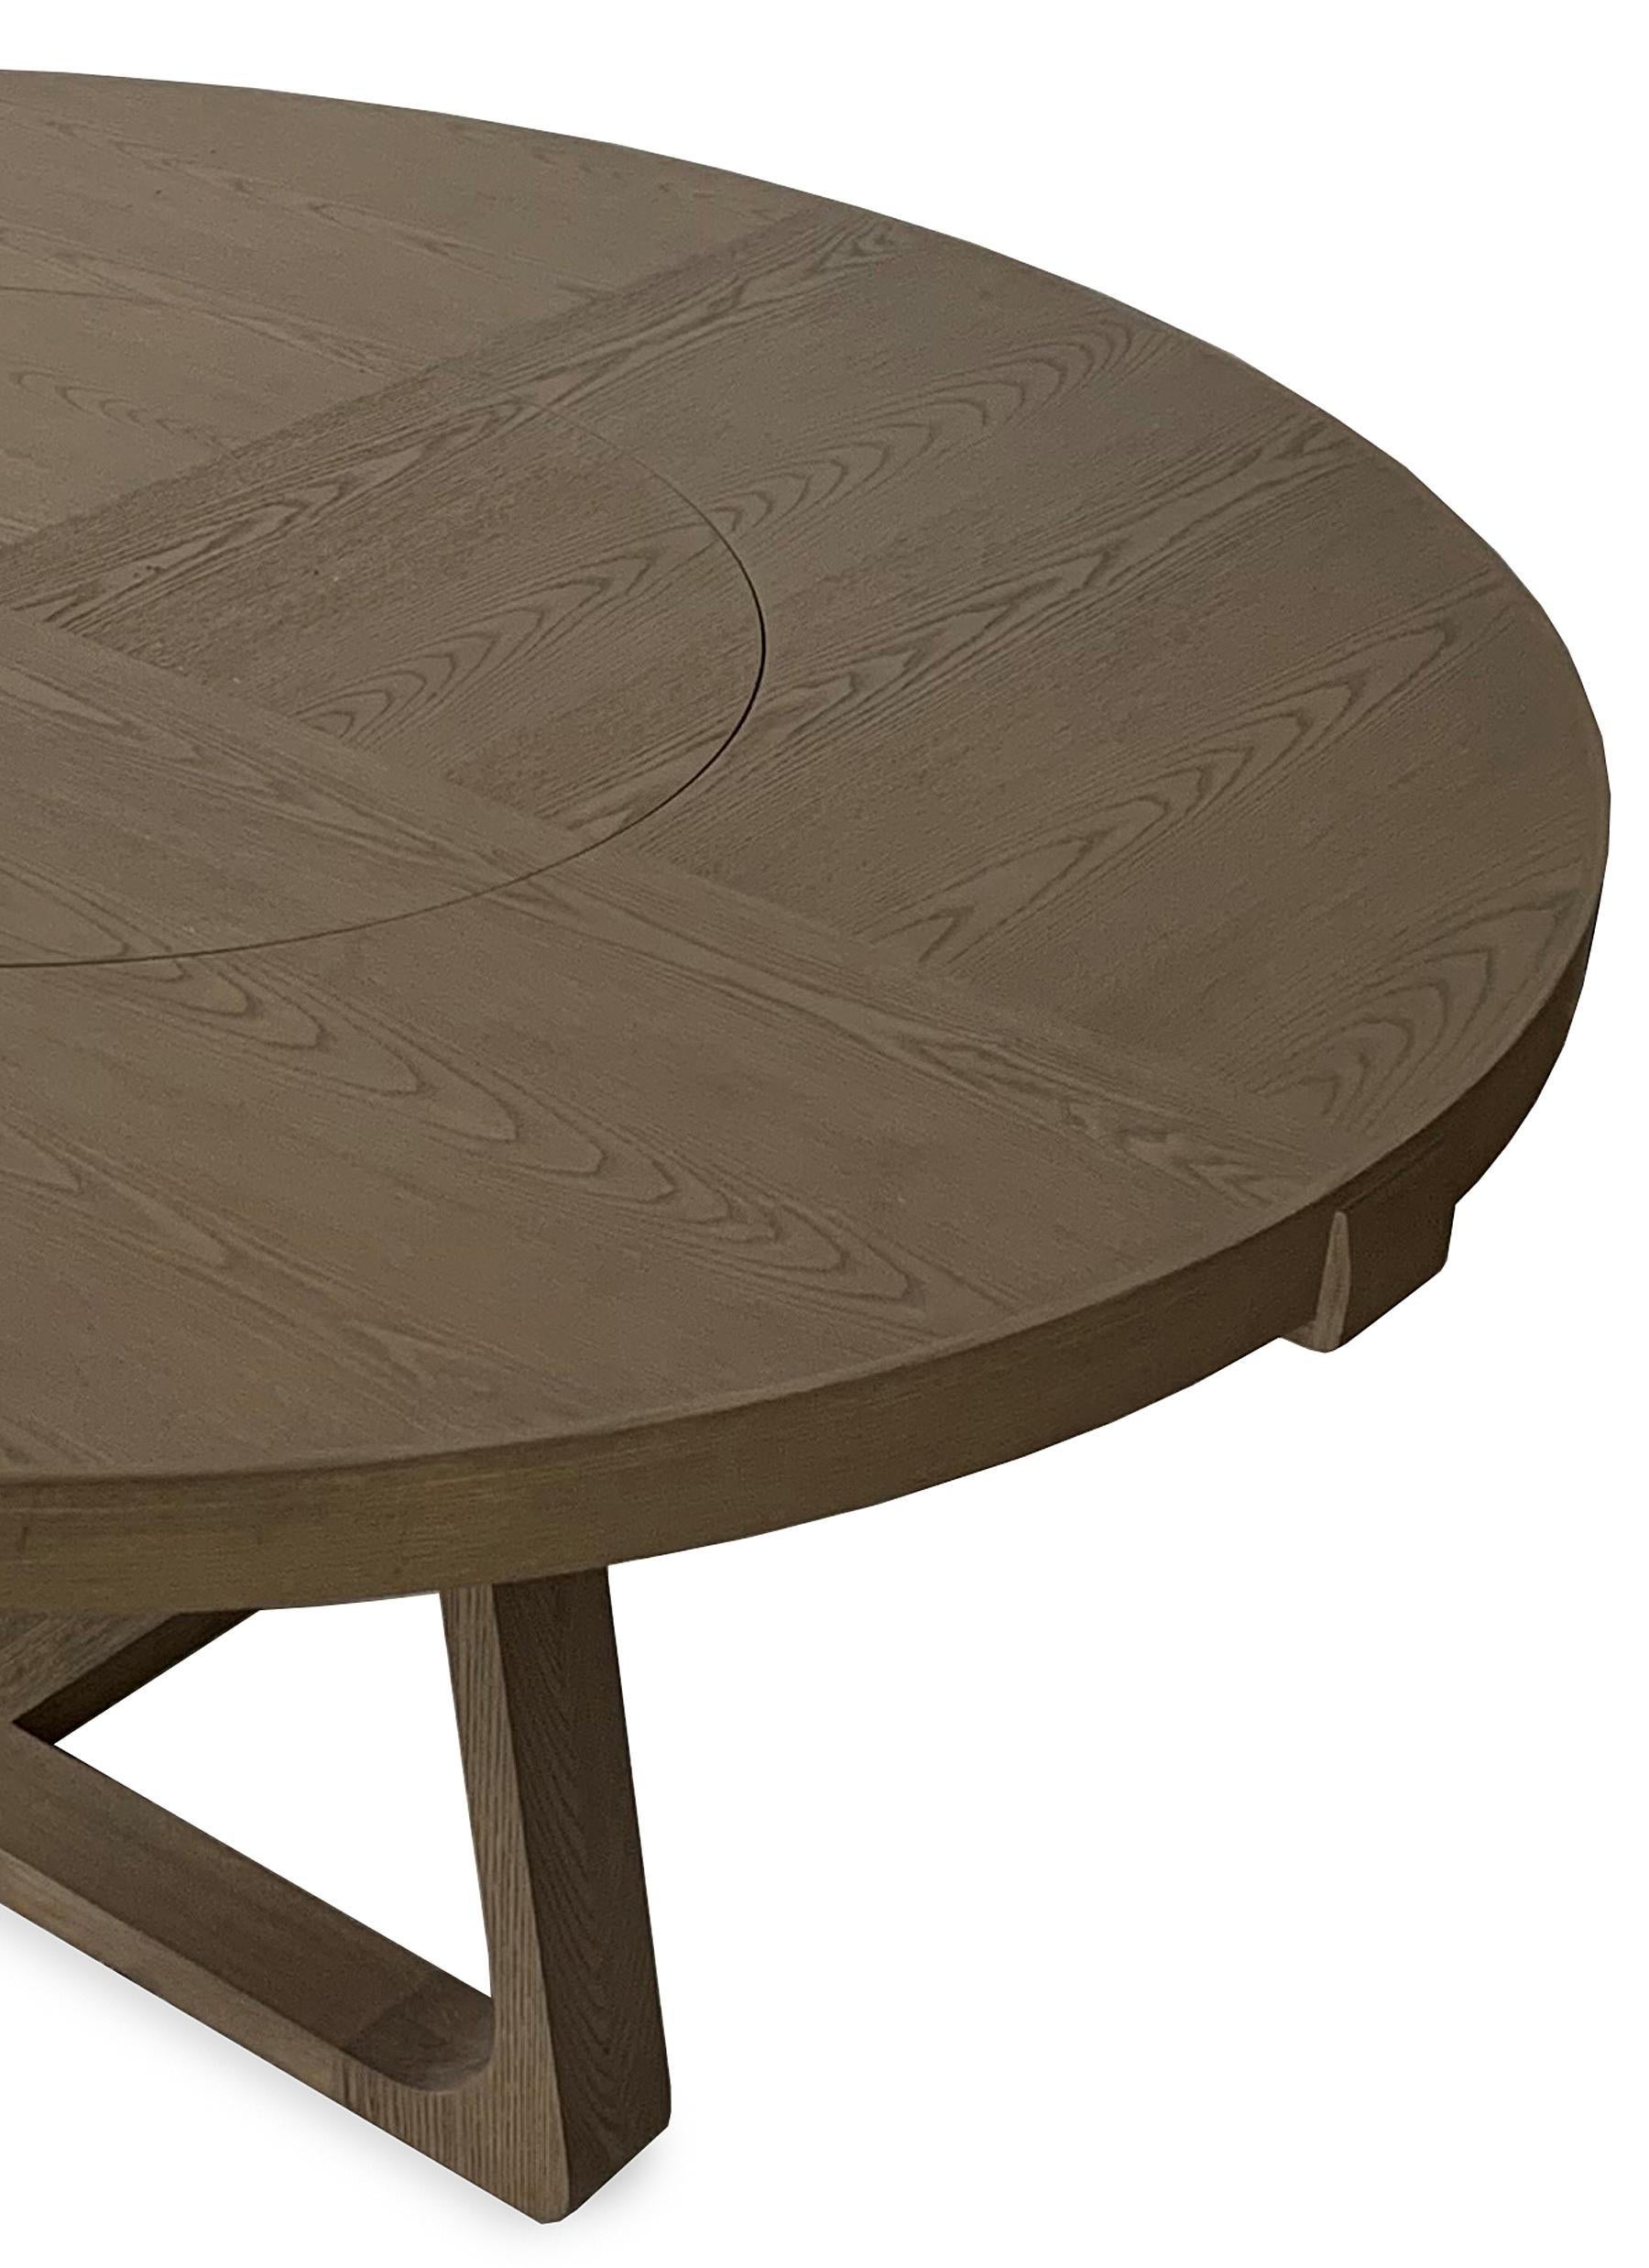 180cm round dining table